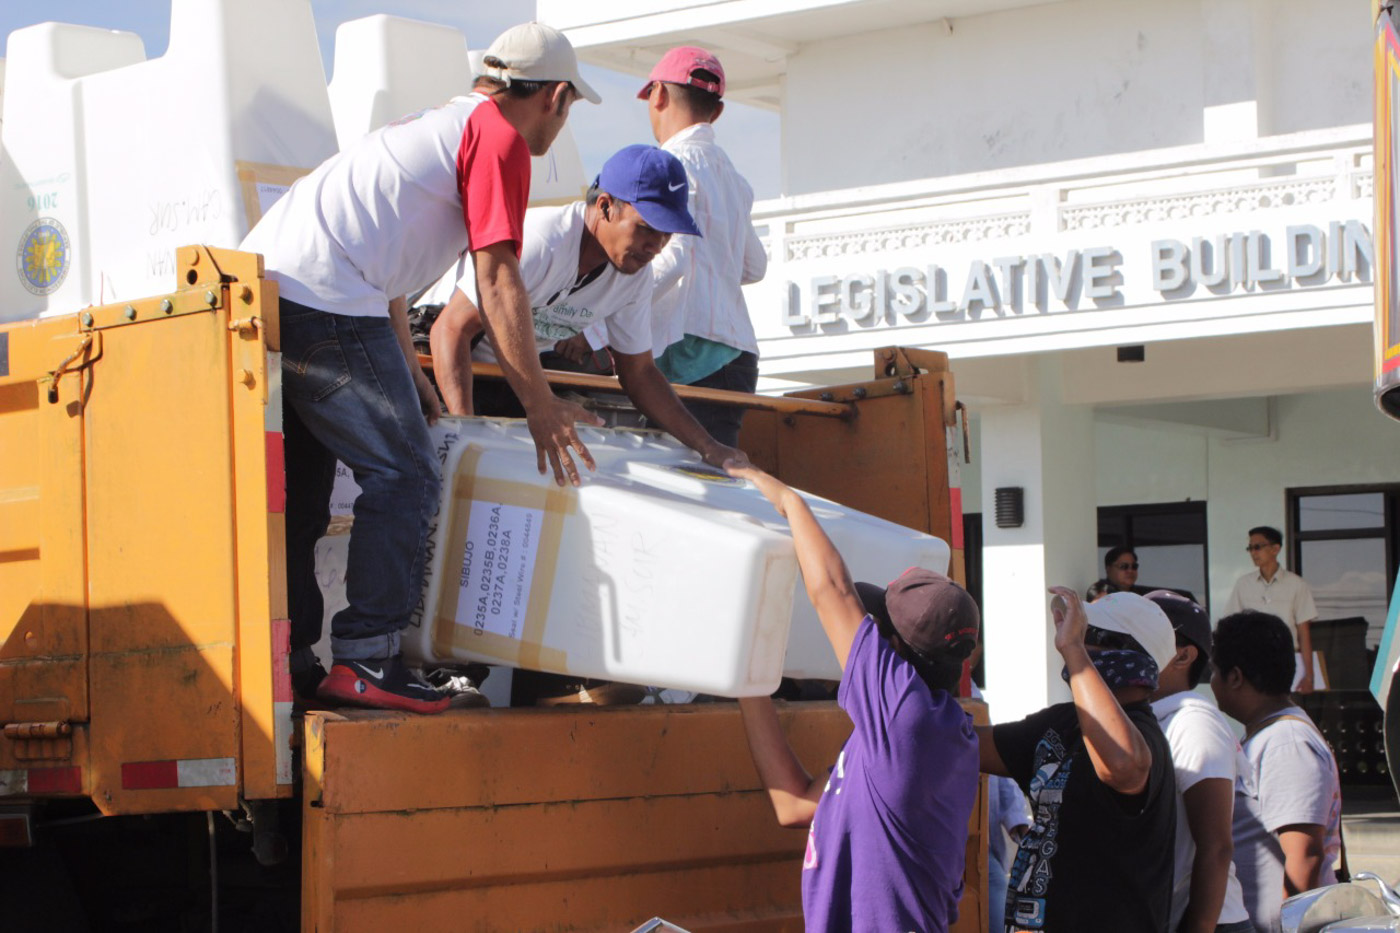 BALLOT RETRIEVAL. Men transfer ballot boxes from a truck to the Legislative Building in Pili, where representatives from the SC are waiting for them. All photos by OVP 